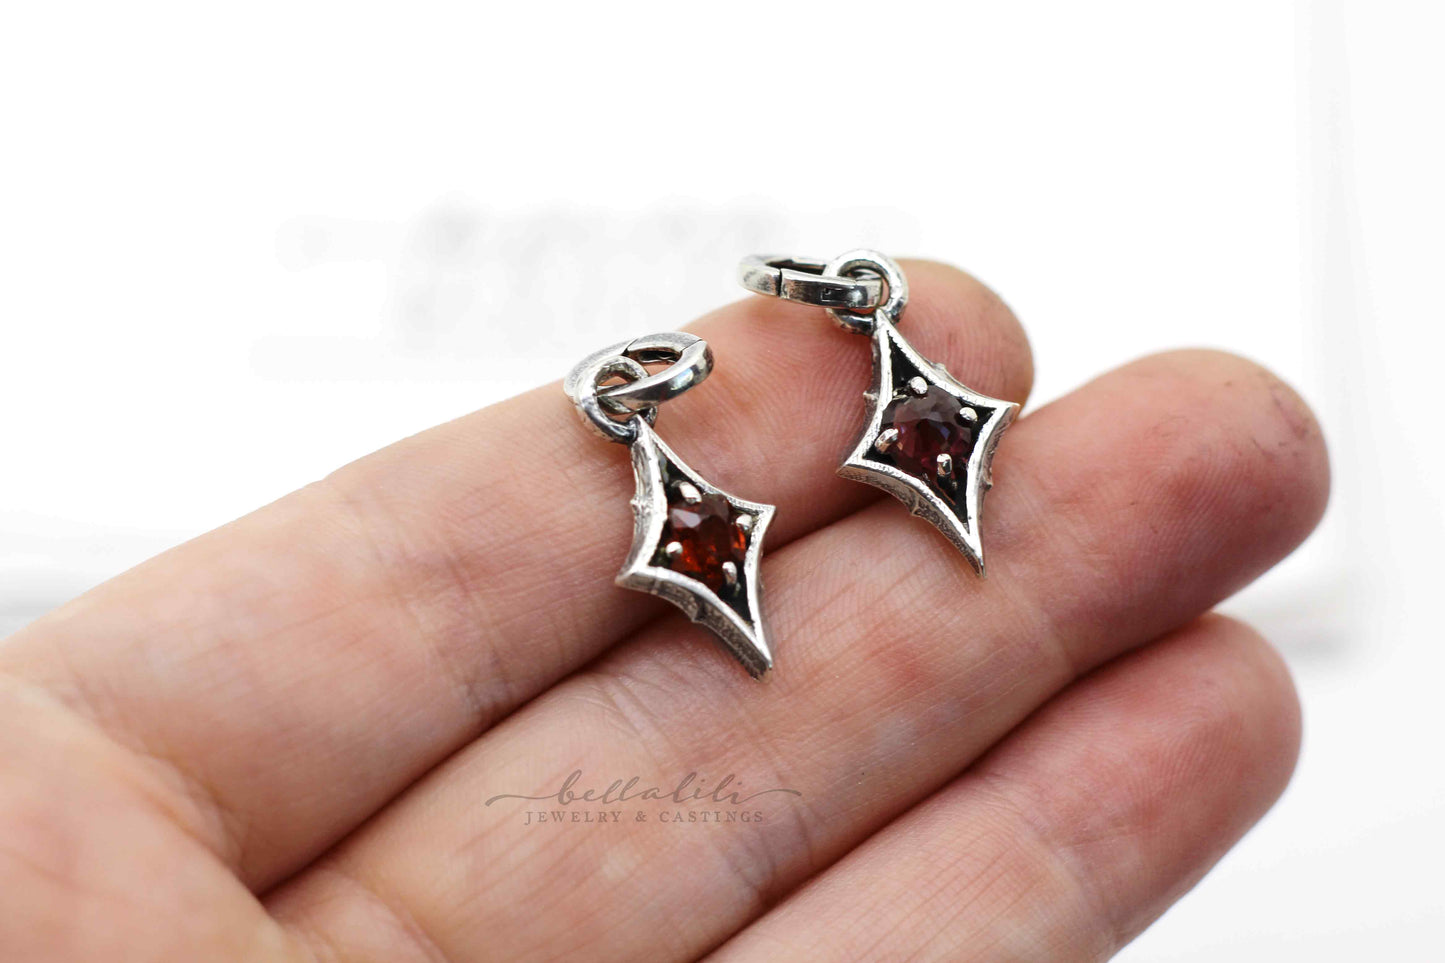 Bloodwine Spinel, Red Spinel & Gothic Star Sterling Silver Pendant